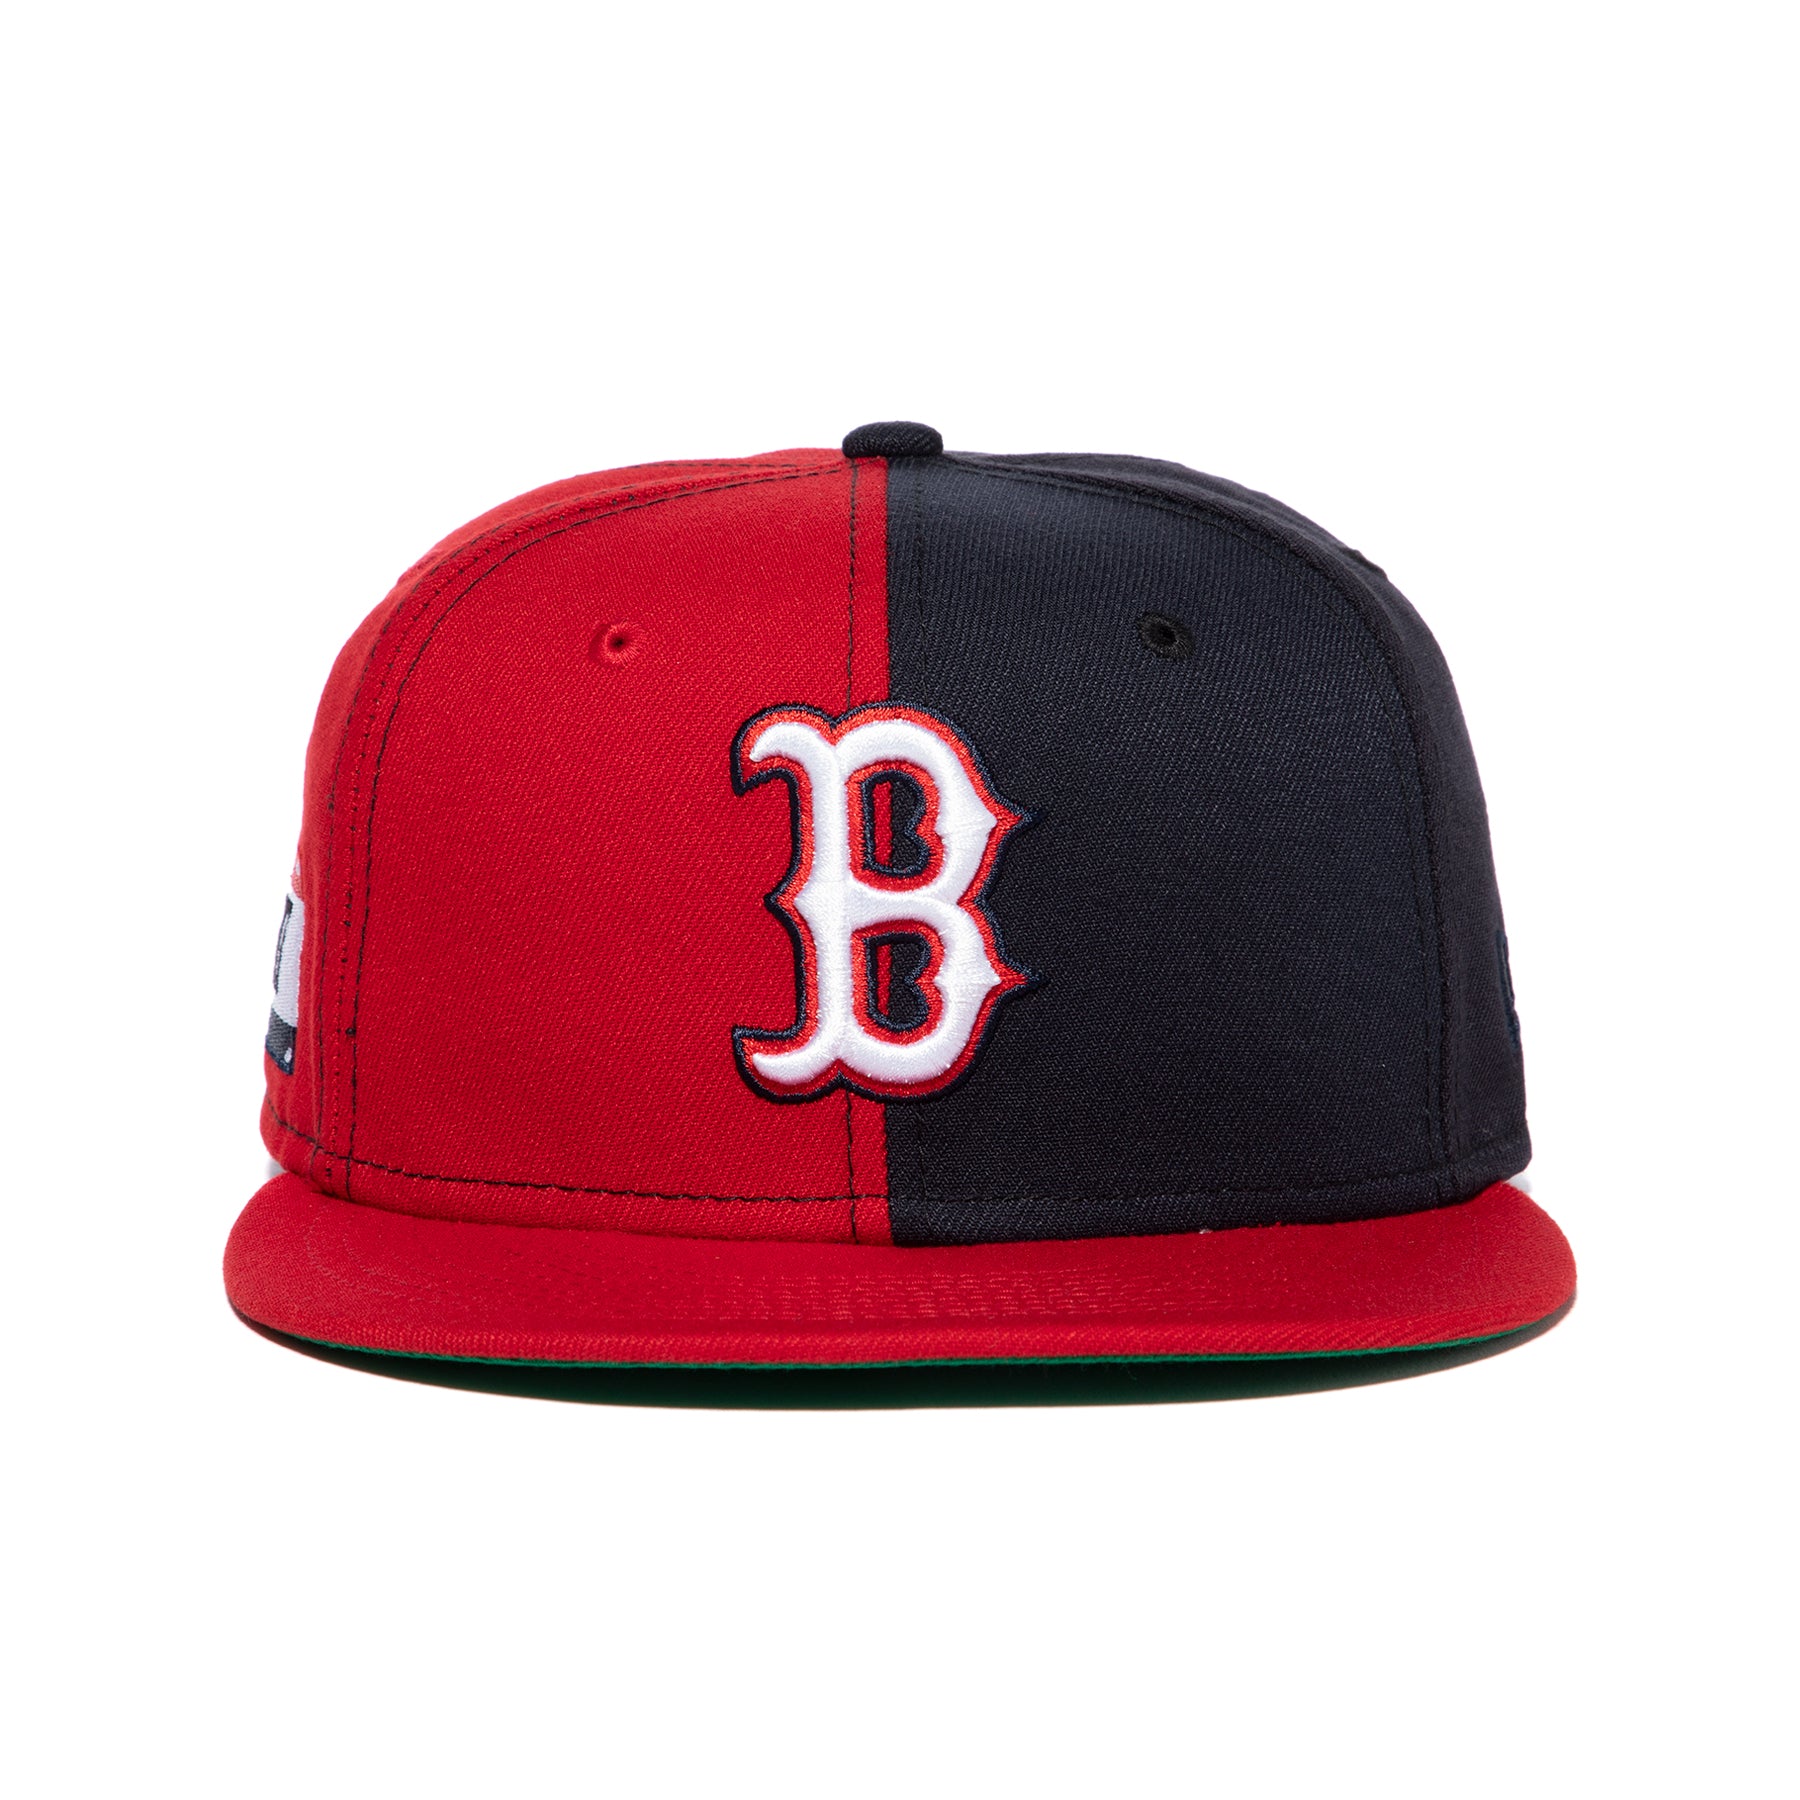 red sox 617 patch